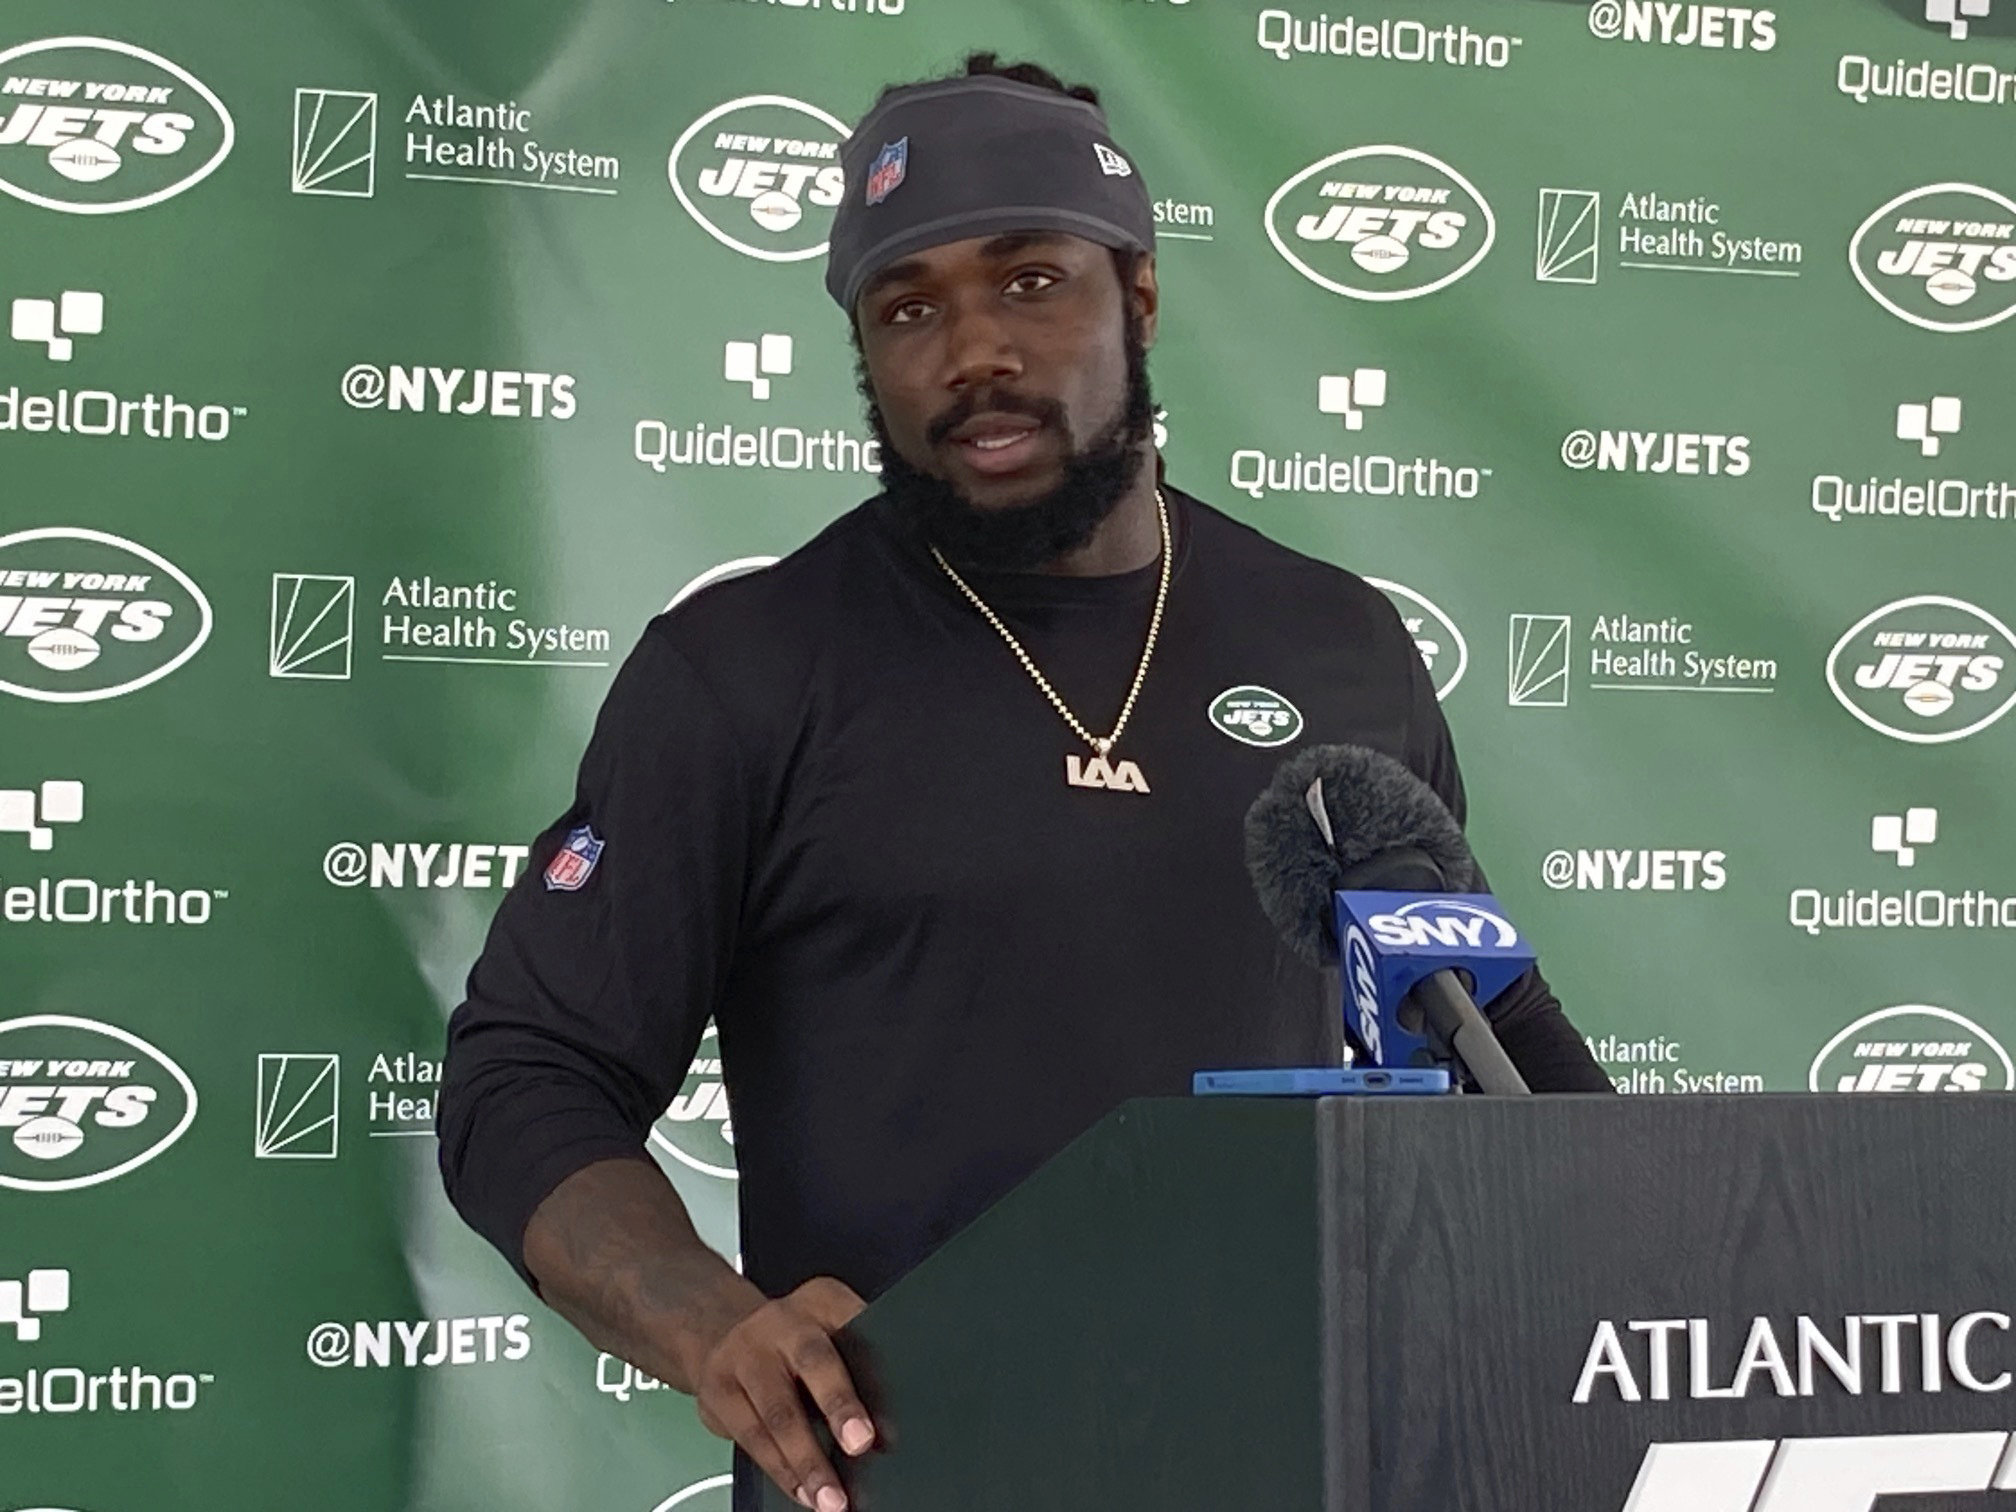 Dalvin Cook on His Addition to Jets' Recipe: I Think I Can Help